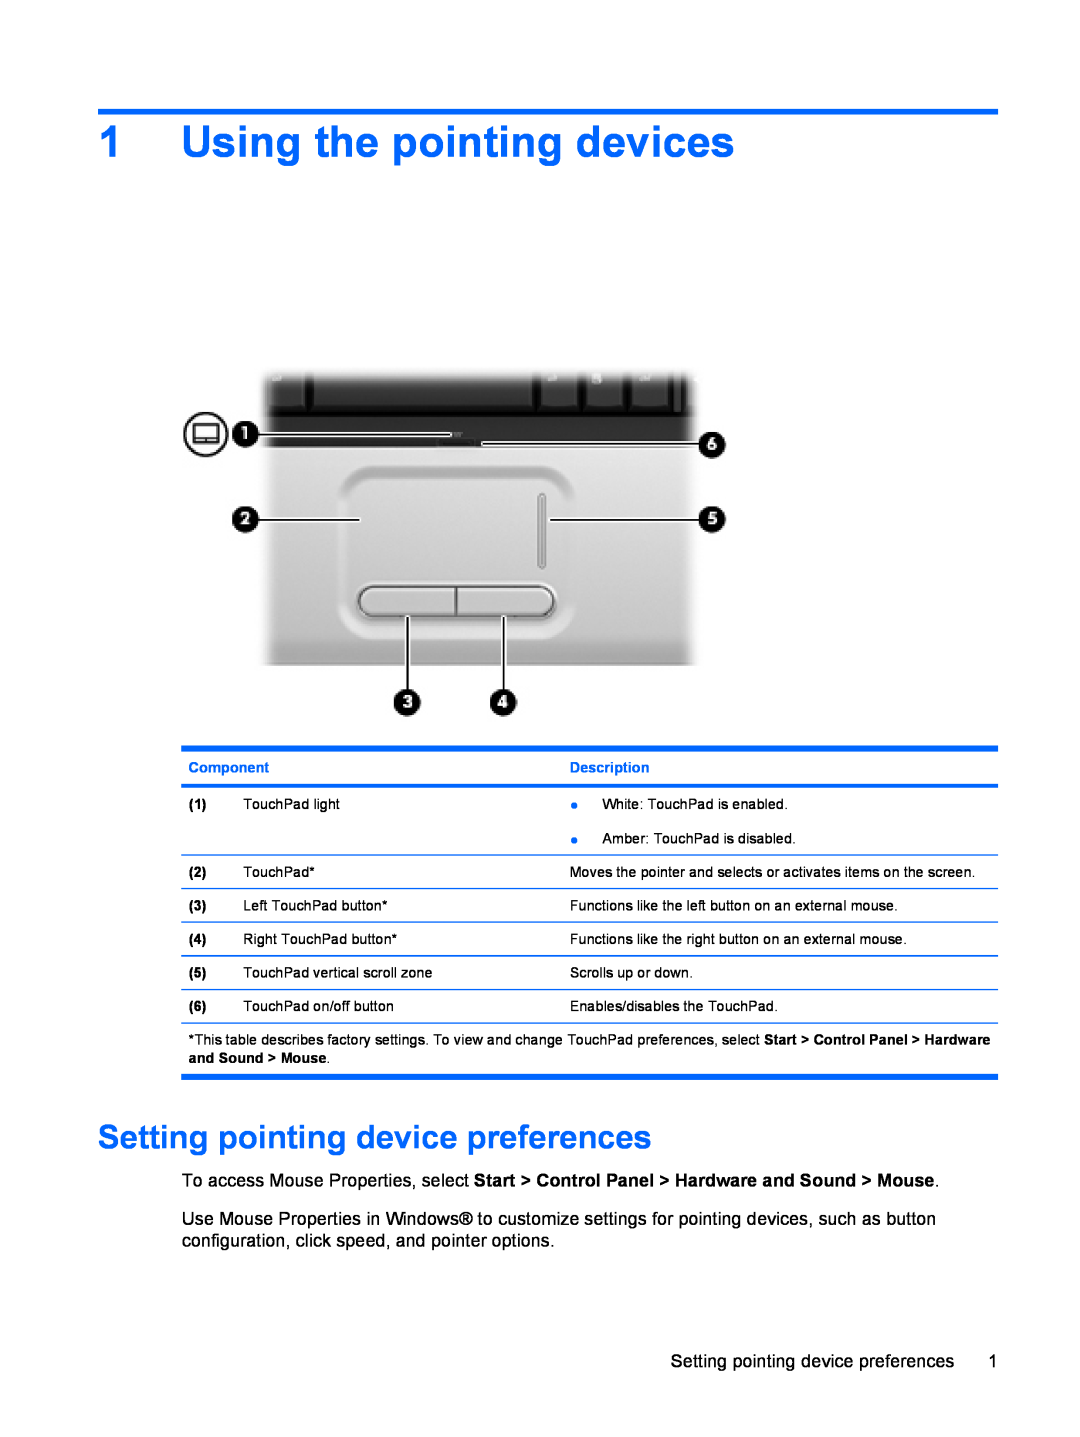 HP CQ60-107TX, CQ60-109TX, CQ60-100 Using the pointing devices, Setting pointing device preferences, Component, Description 